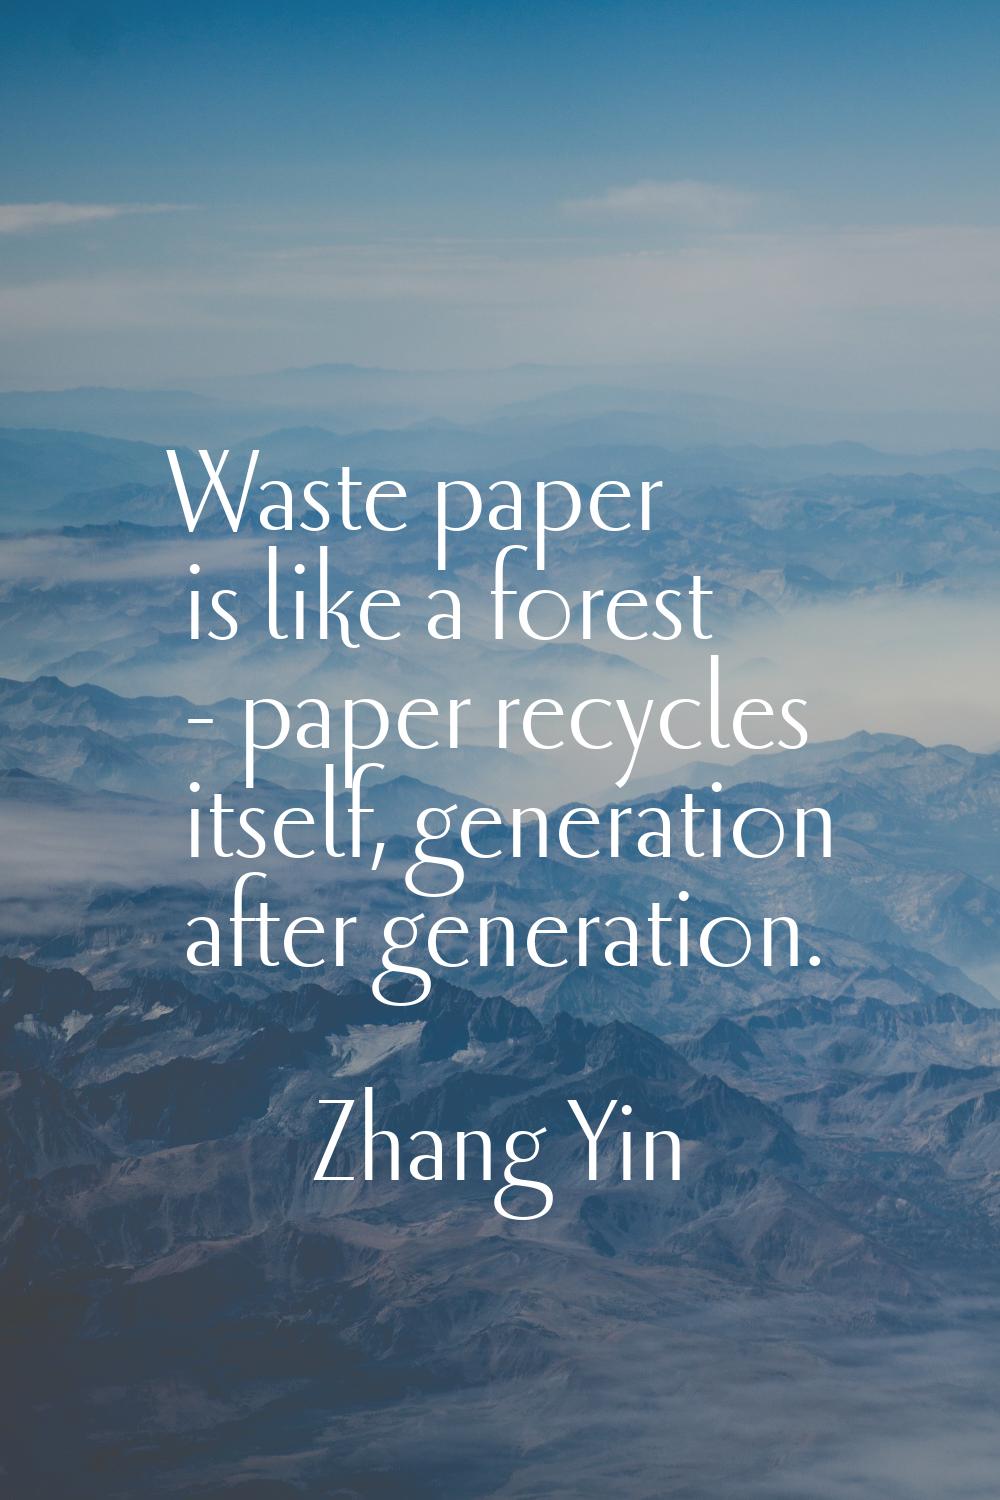 Waste paper is like a forest - paper recycles itself, generation after generation.